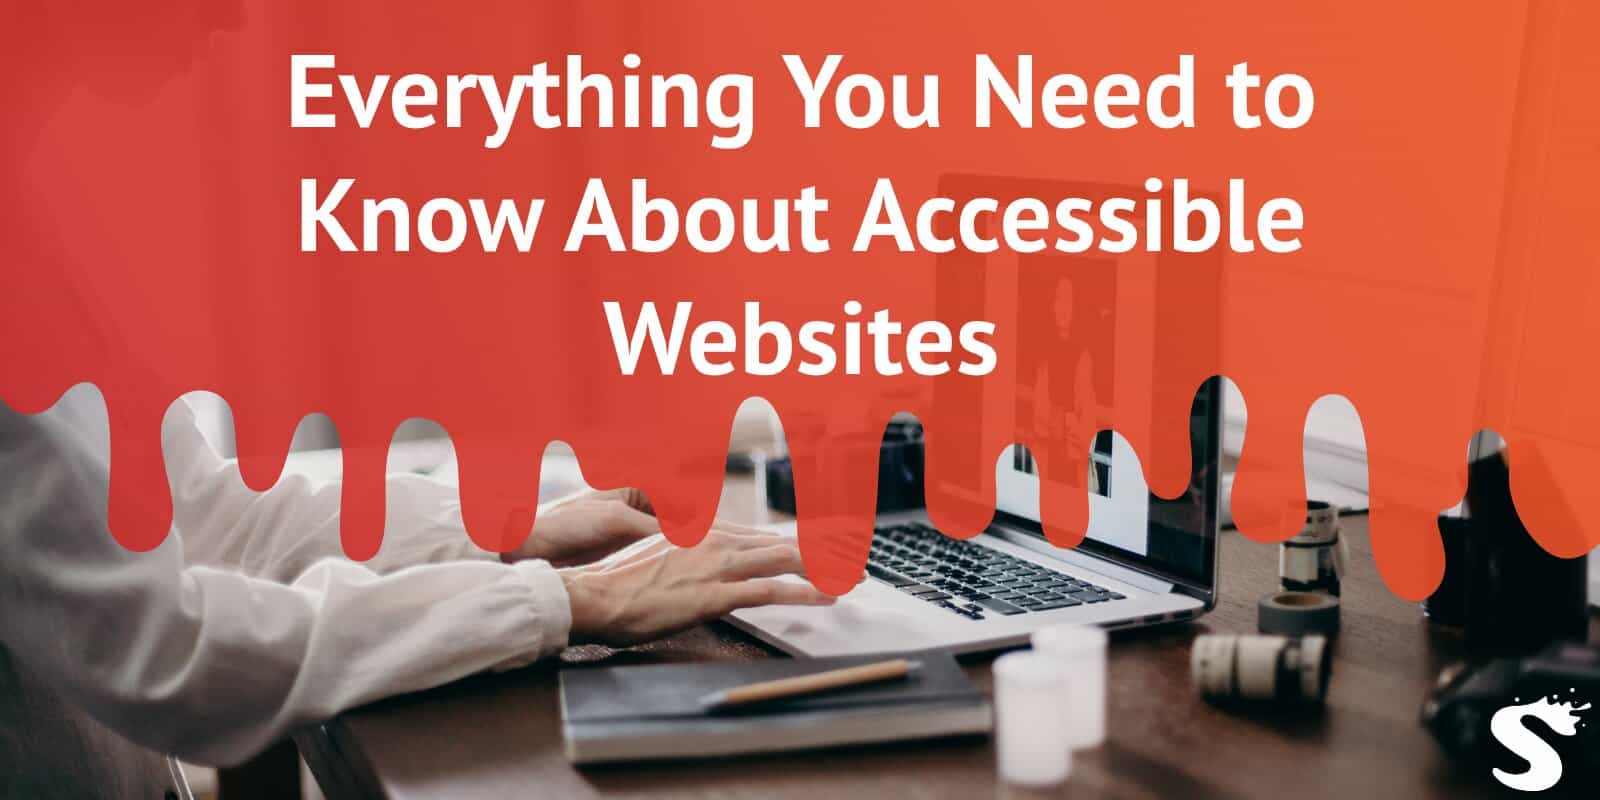 Everything You Need to Know About Accessible Websites